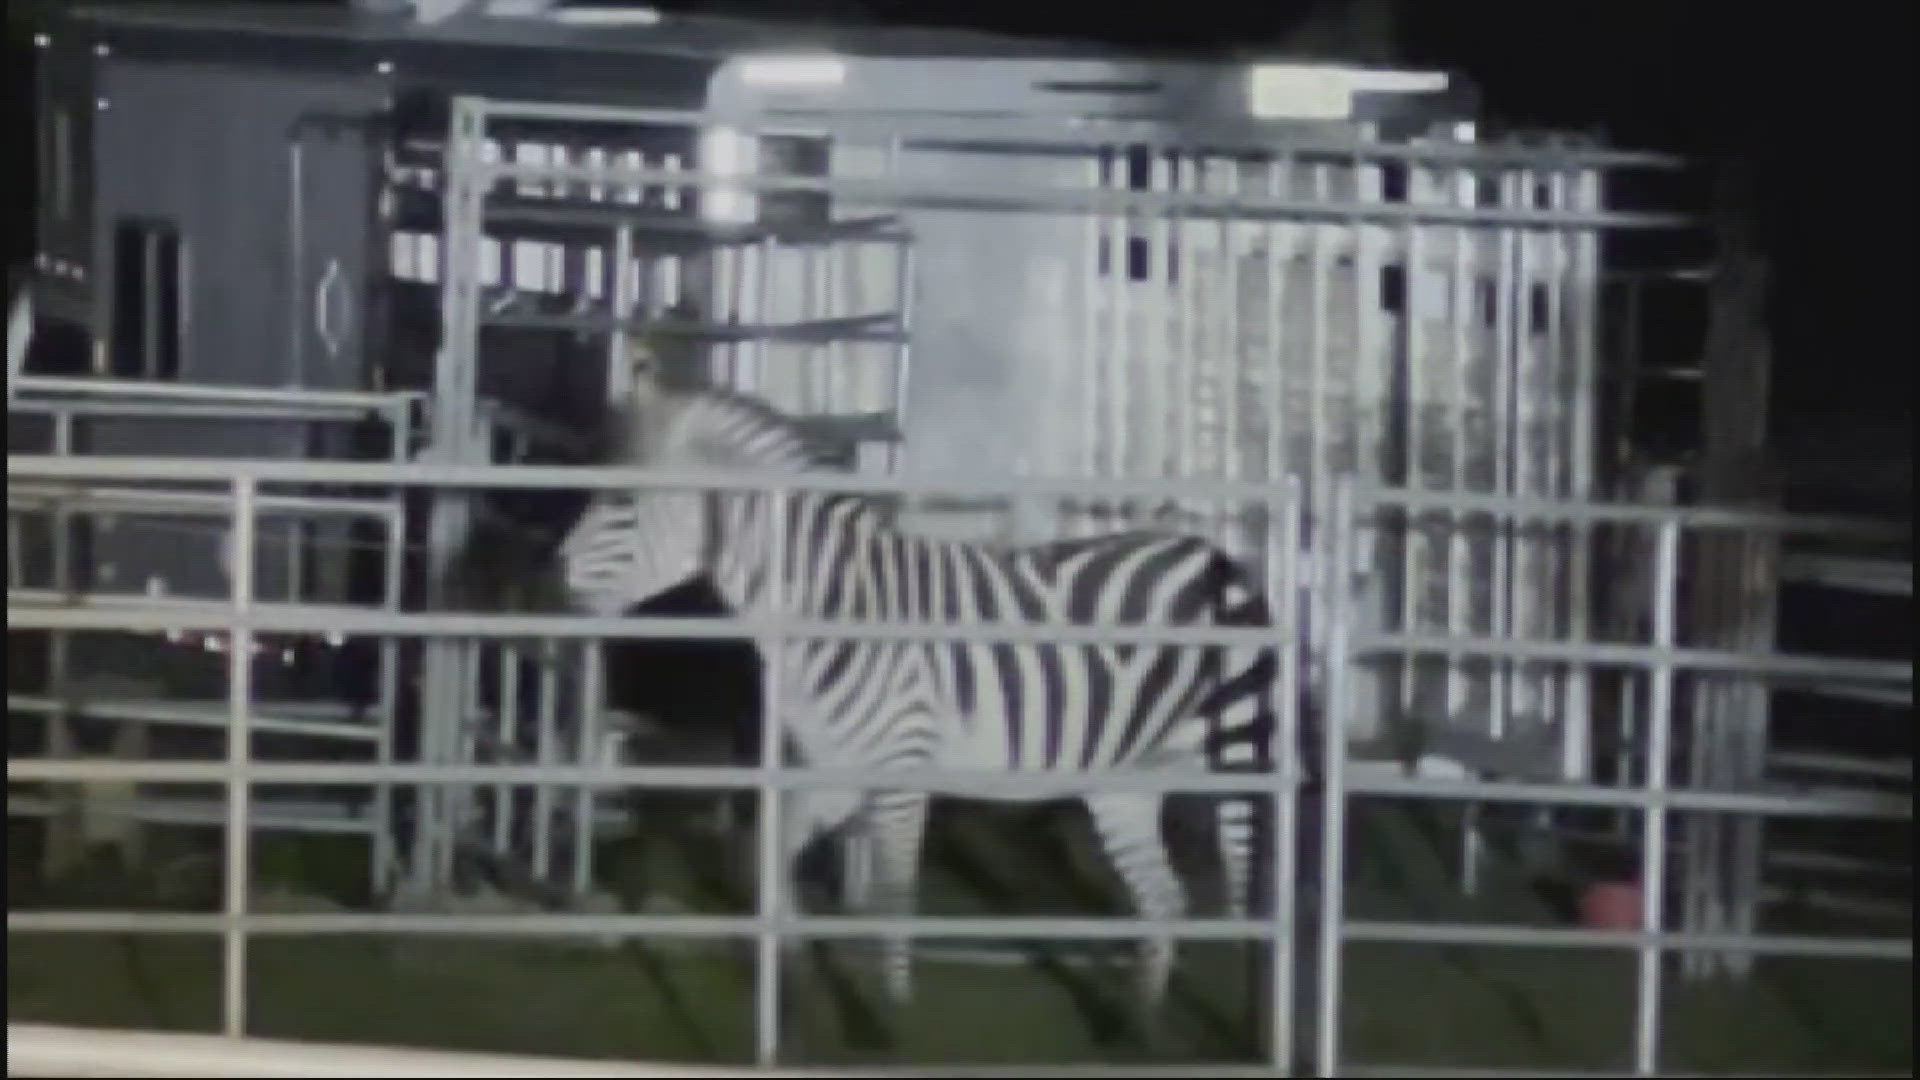 The mare, or female zebra, was rescued in the Riverbend neighborhood after being on the loose for almost six days.